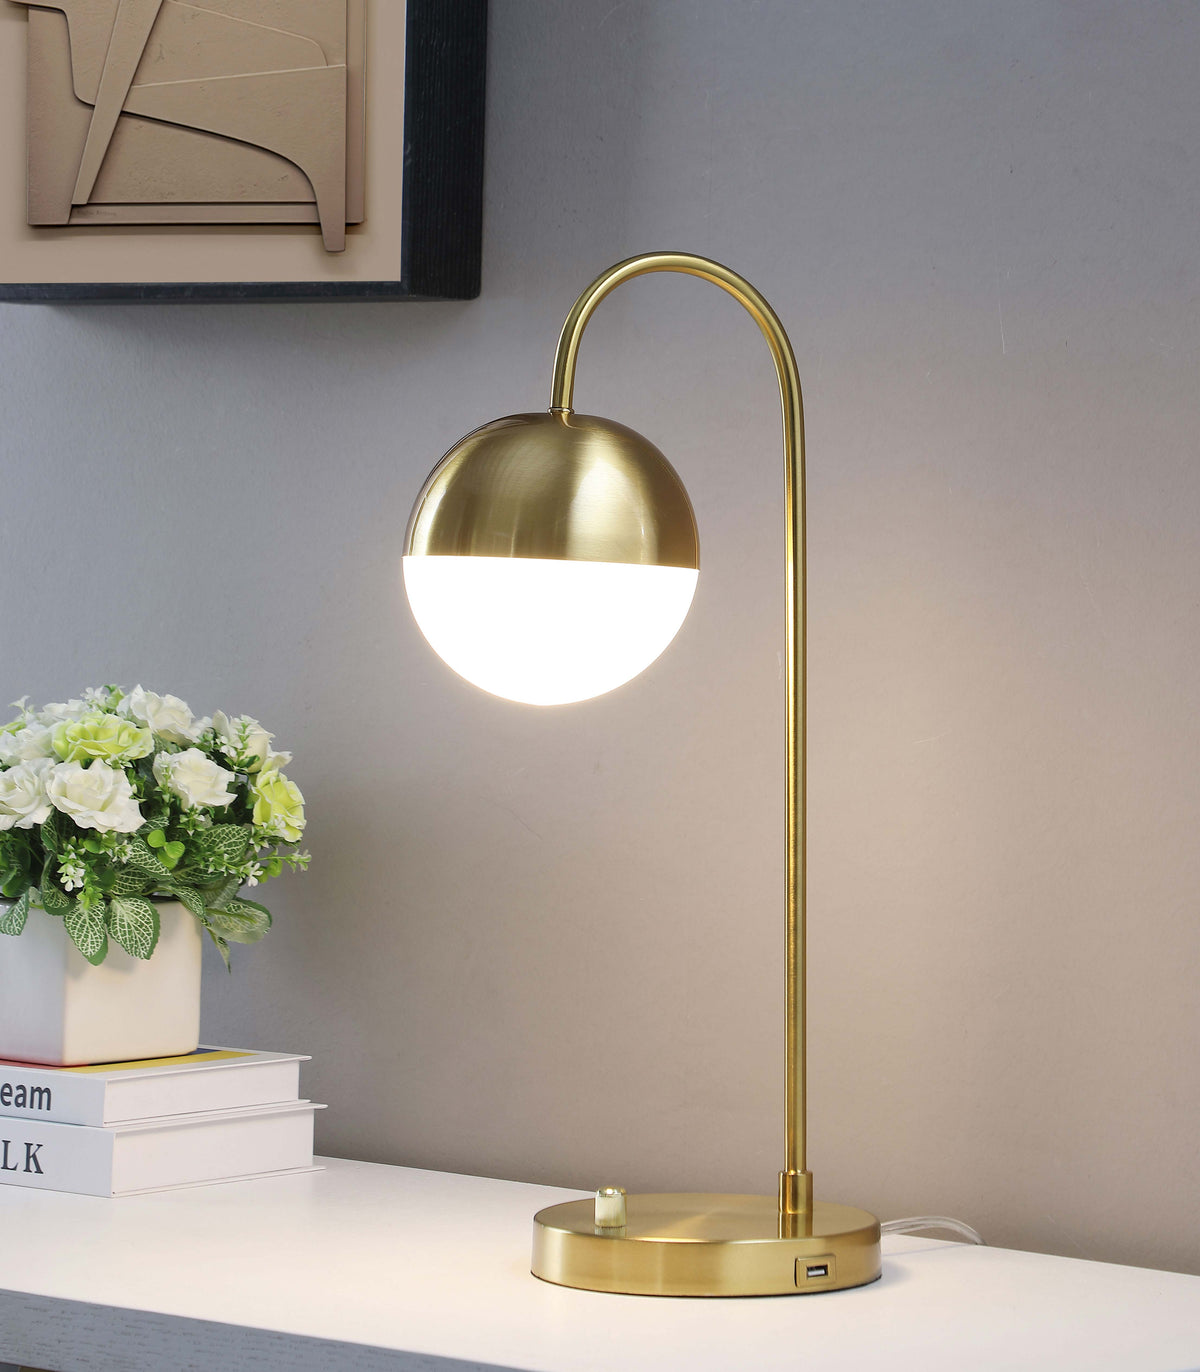 Merrick Round Arched Table Lamp Gold Merrick Round Arched Table Lamp Gold Half Price Furniture